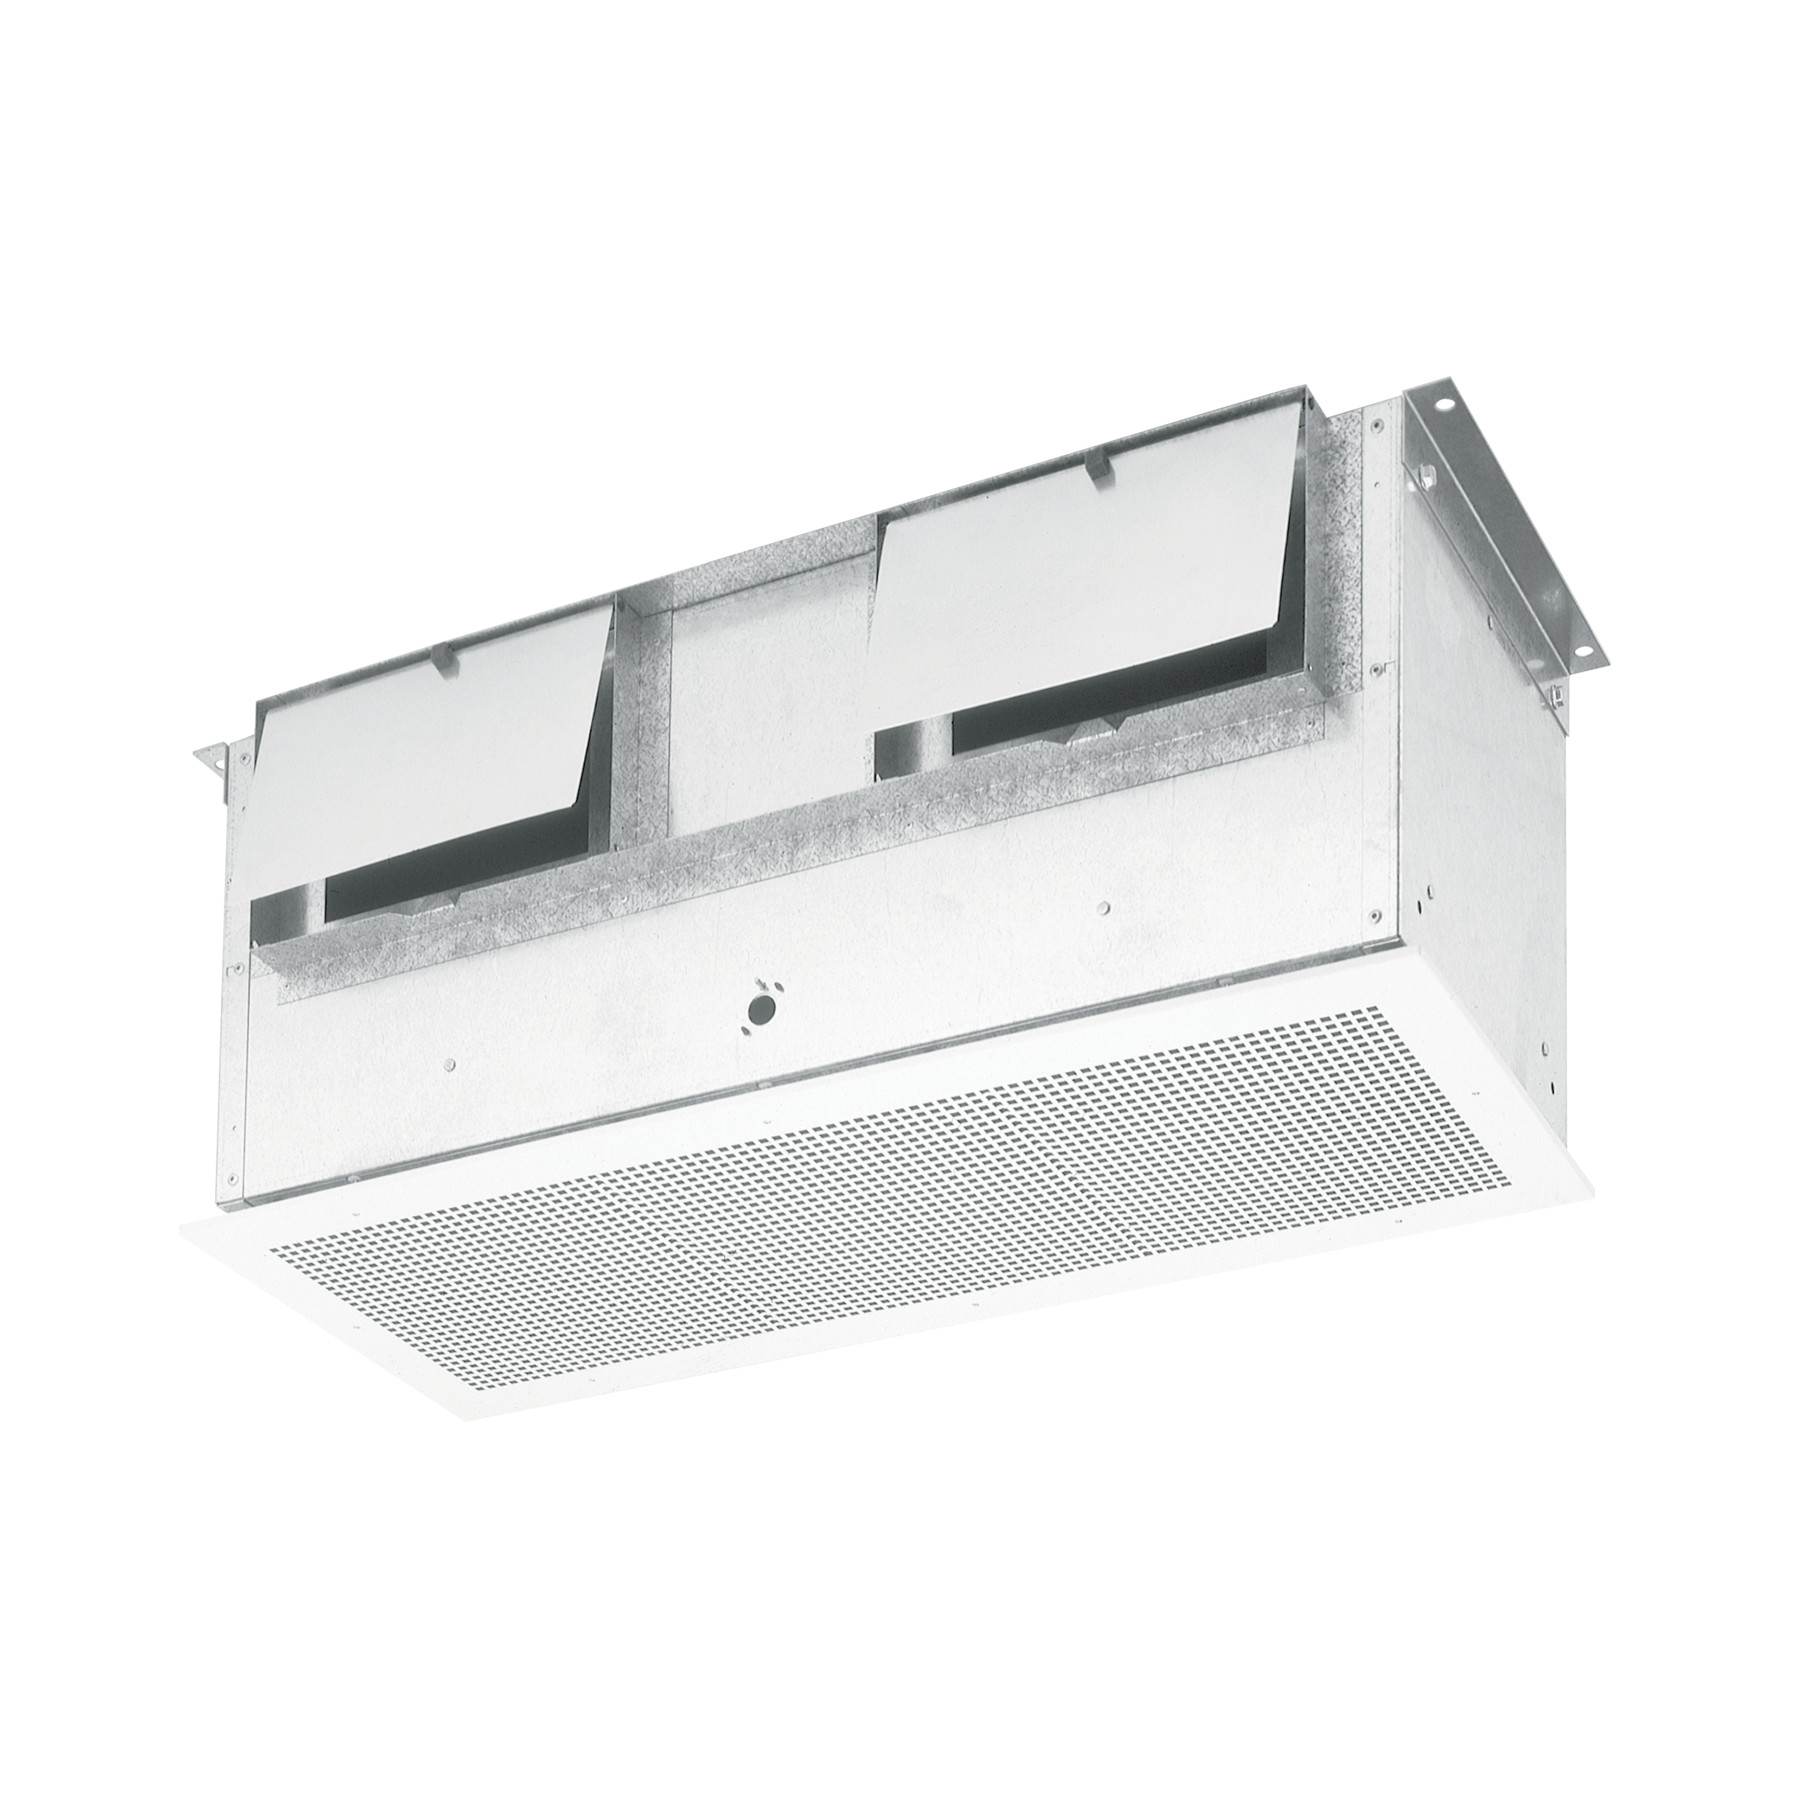 **DISCONTINUED** Broan® LOSONE SELECT™ Ventilation Fan; 3452 CFM Straight Through, 14.5 Sones; 3696 CFM Right Angle